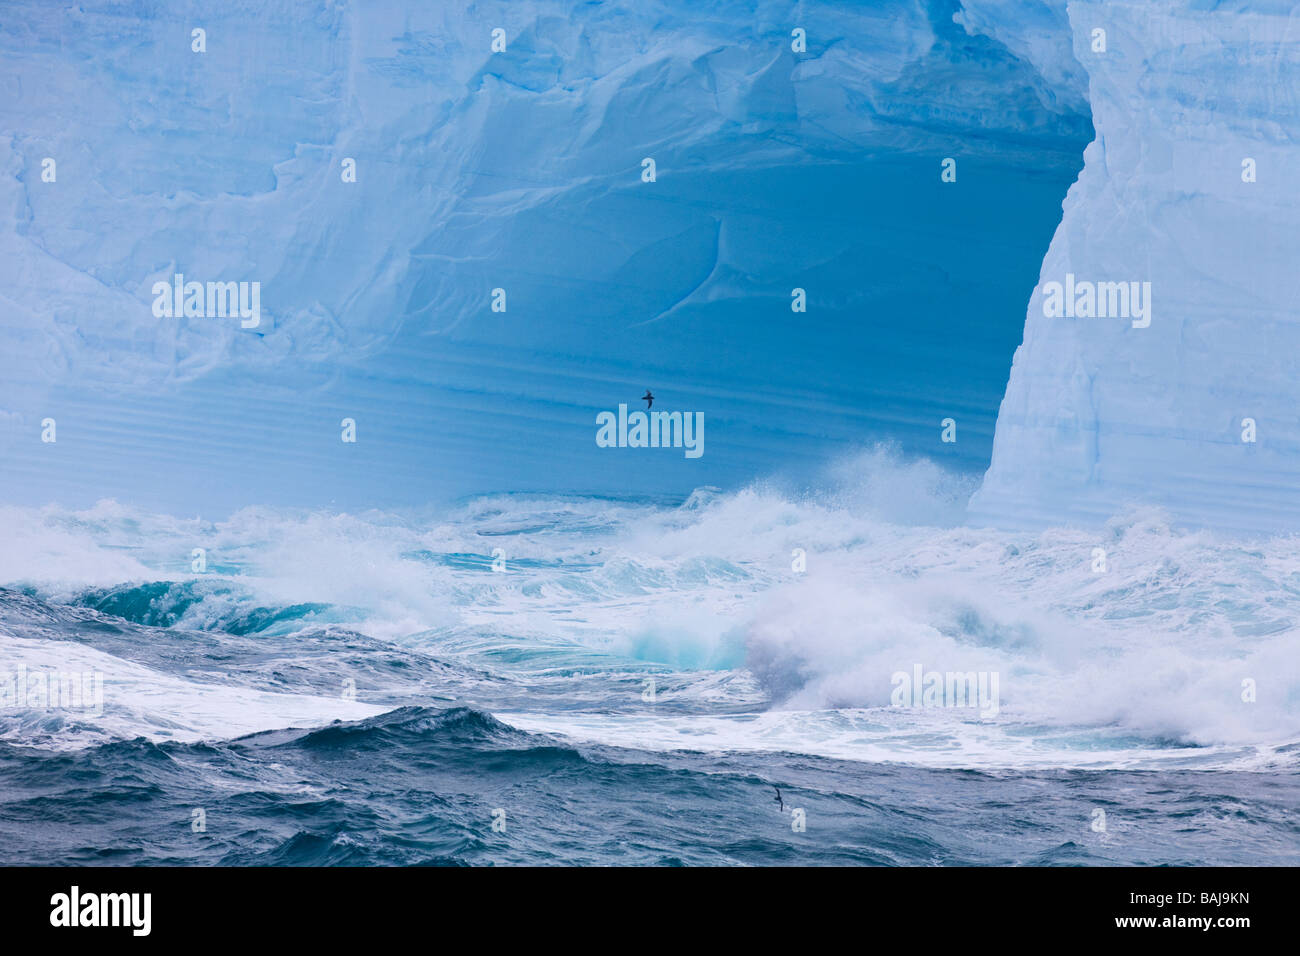 Waves from storms batter a blue tabular iceberg in the Southern Ocean Antarctica Stock Photo